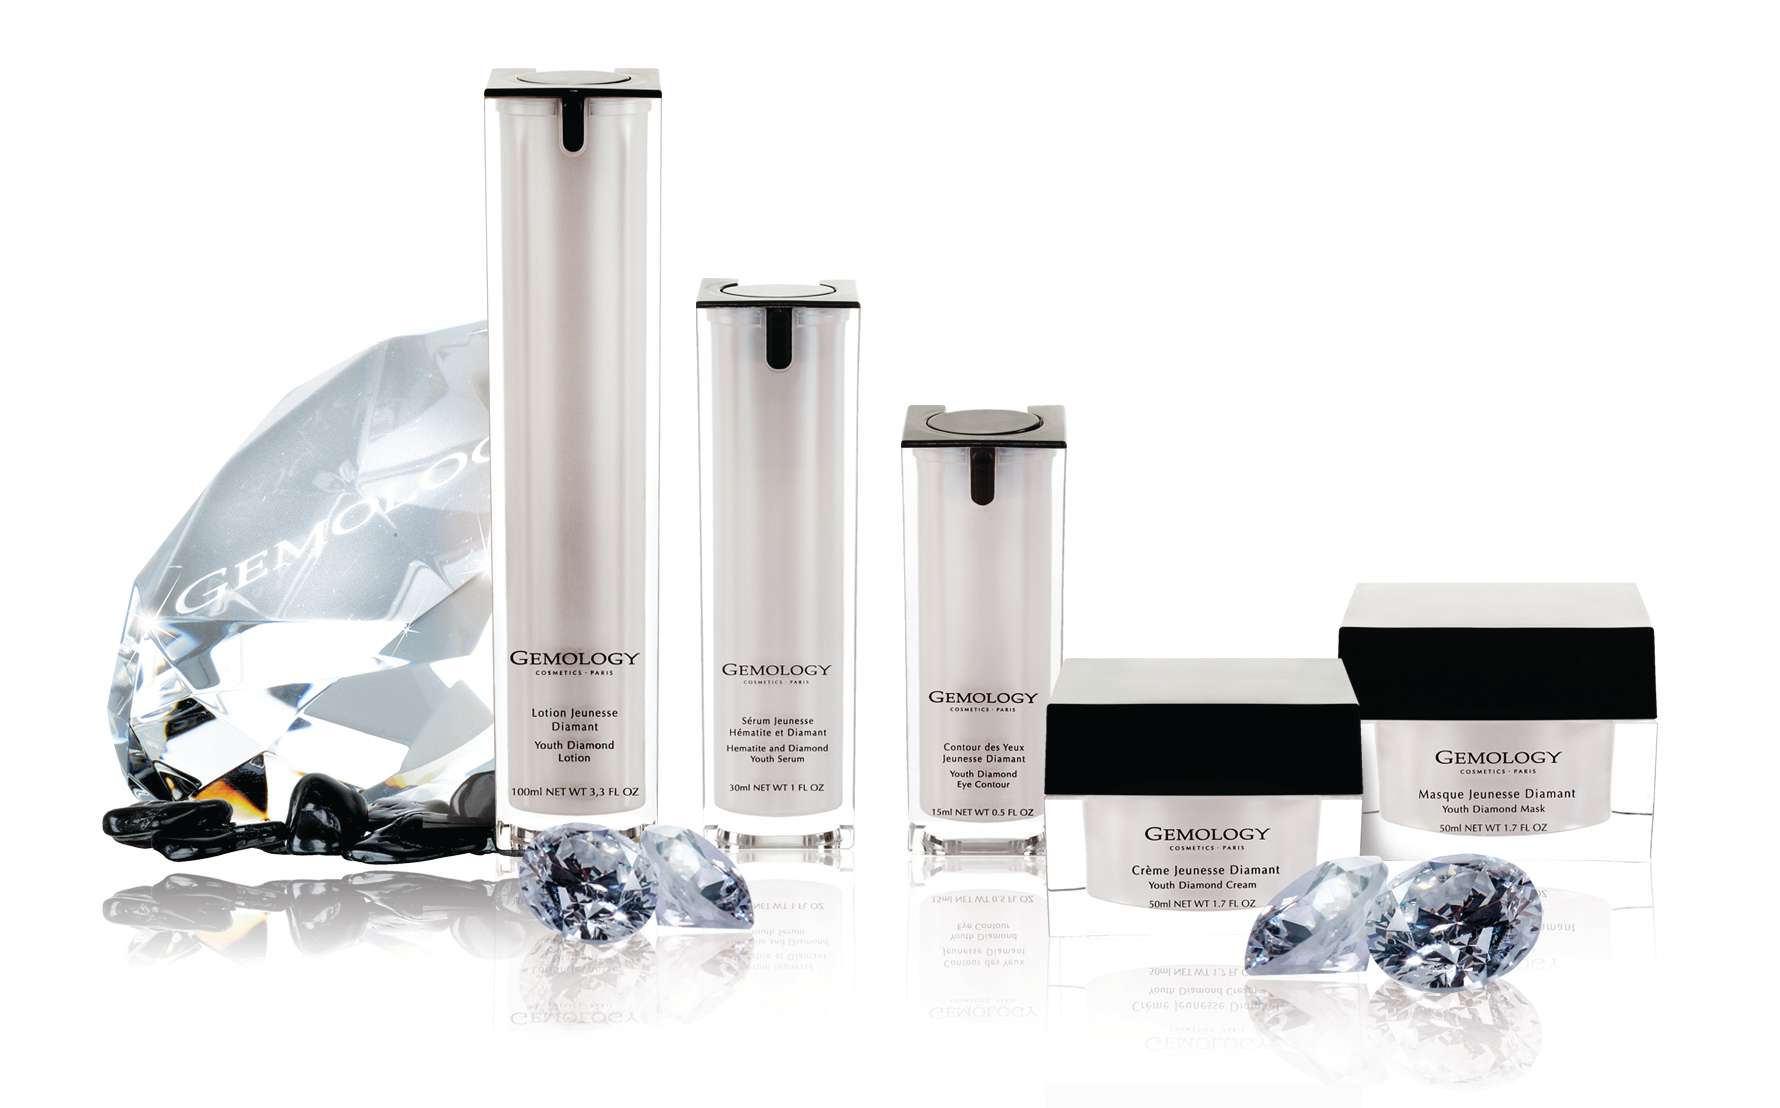 A collection of Gemology beauty products in pots and bottles.